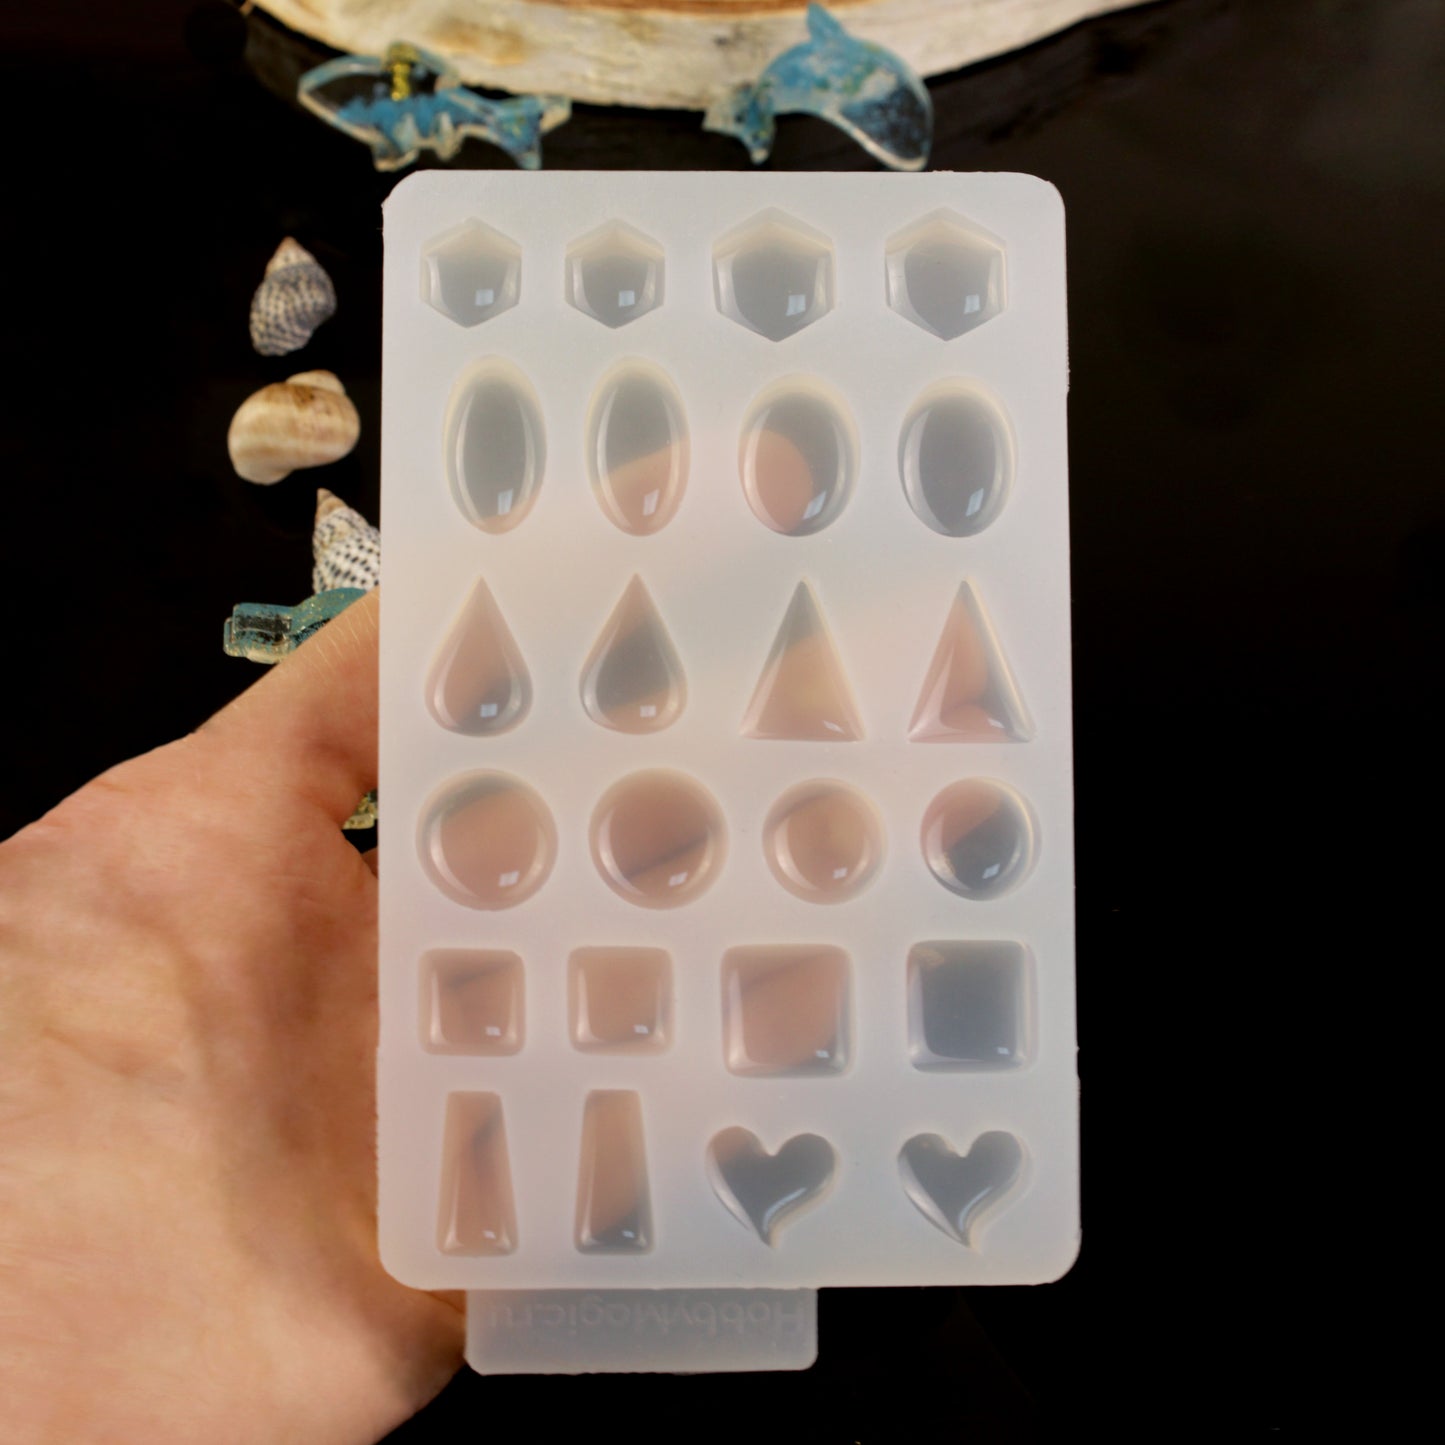 24-in-1 Silicone Mold Set for Earrings and Jewelry